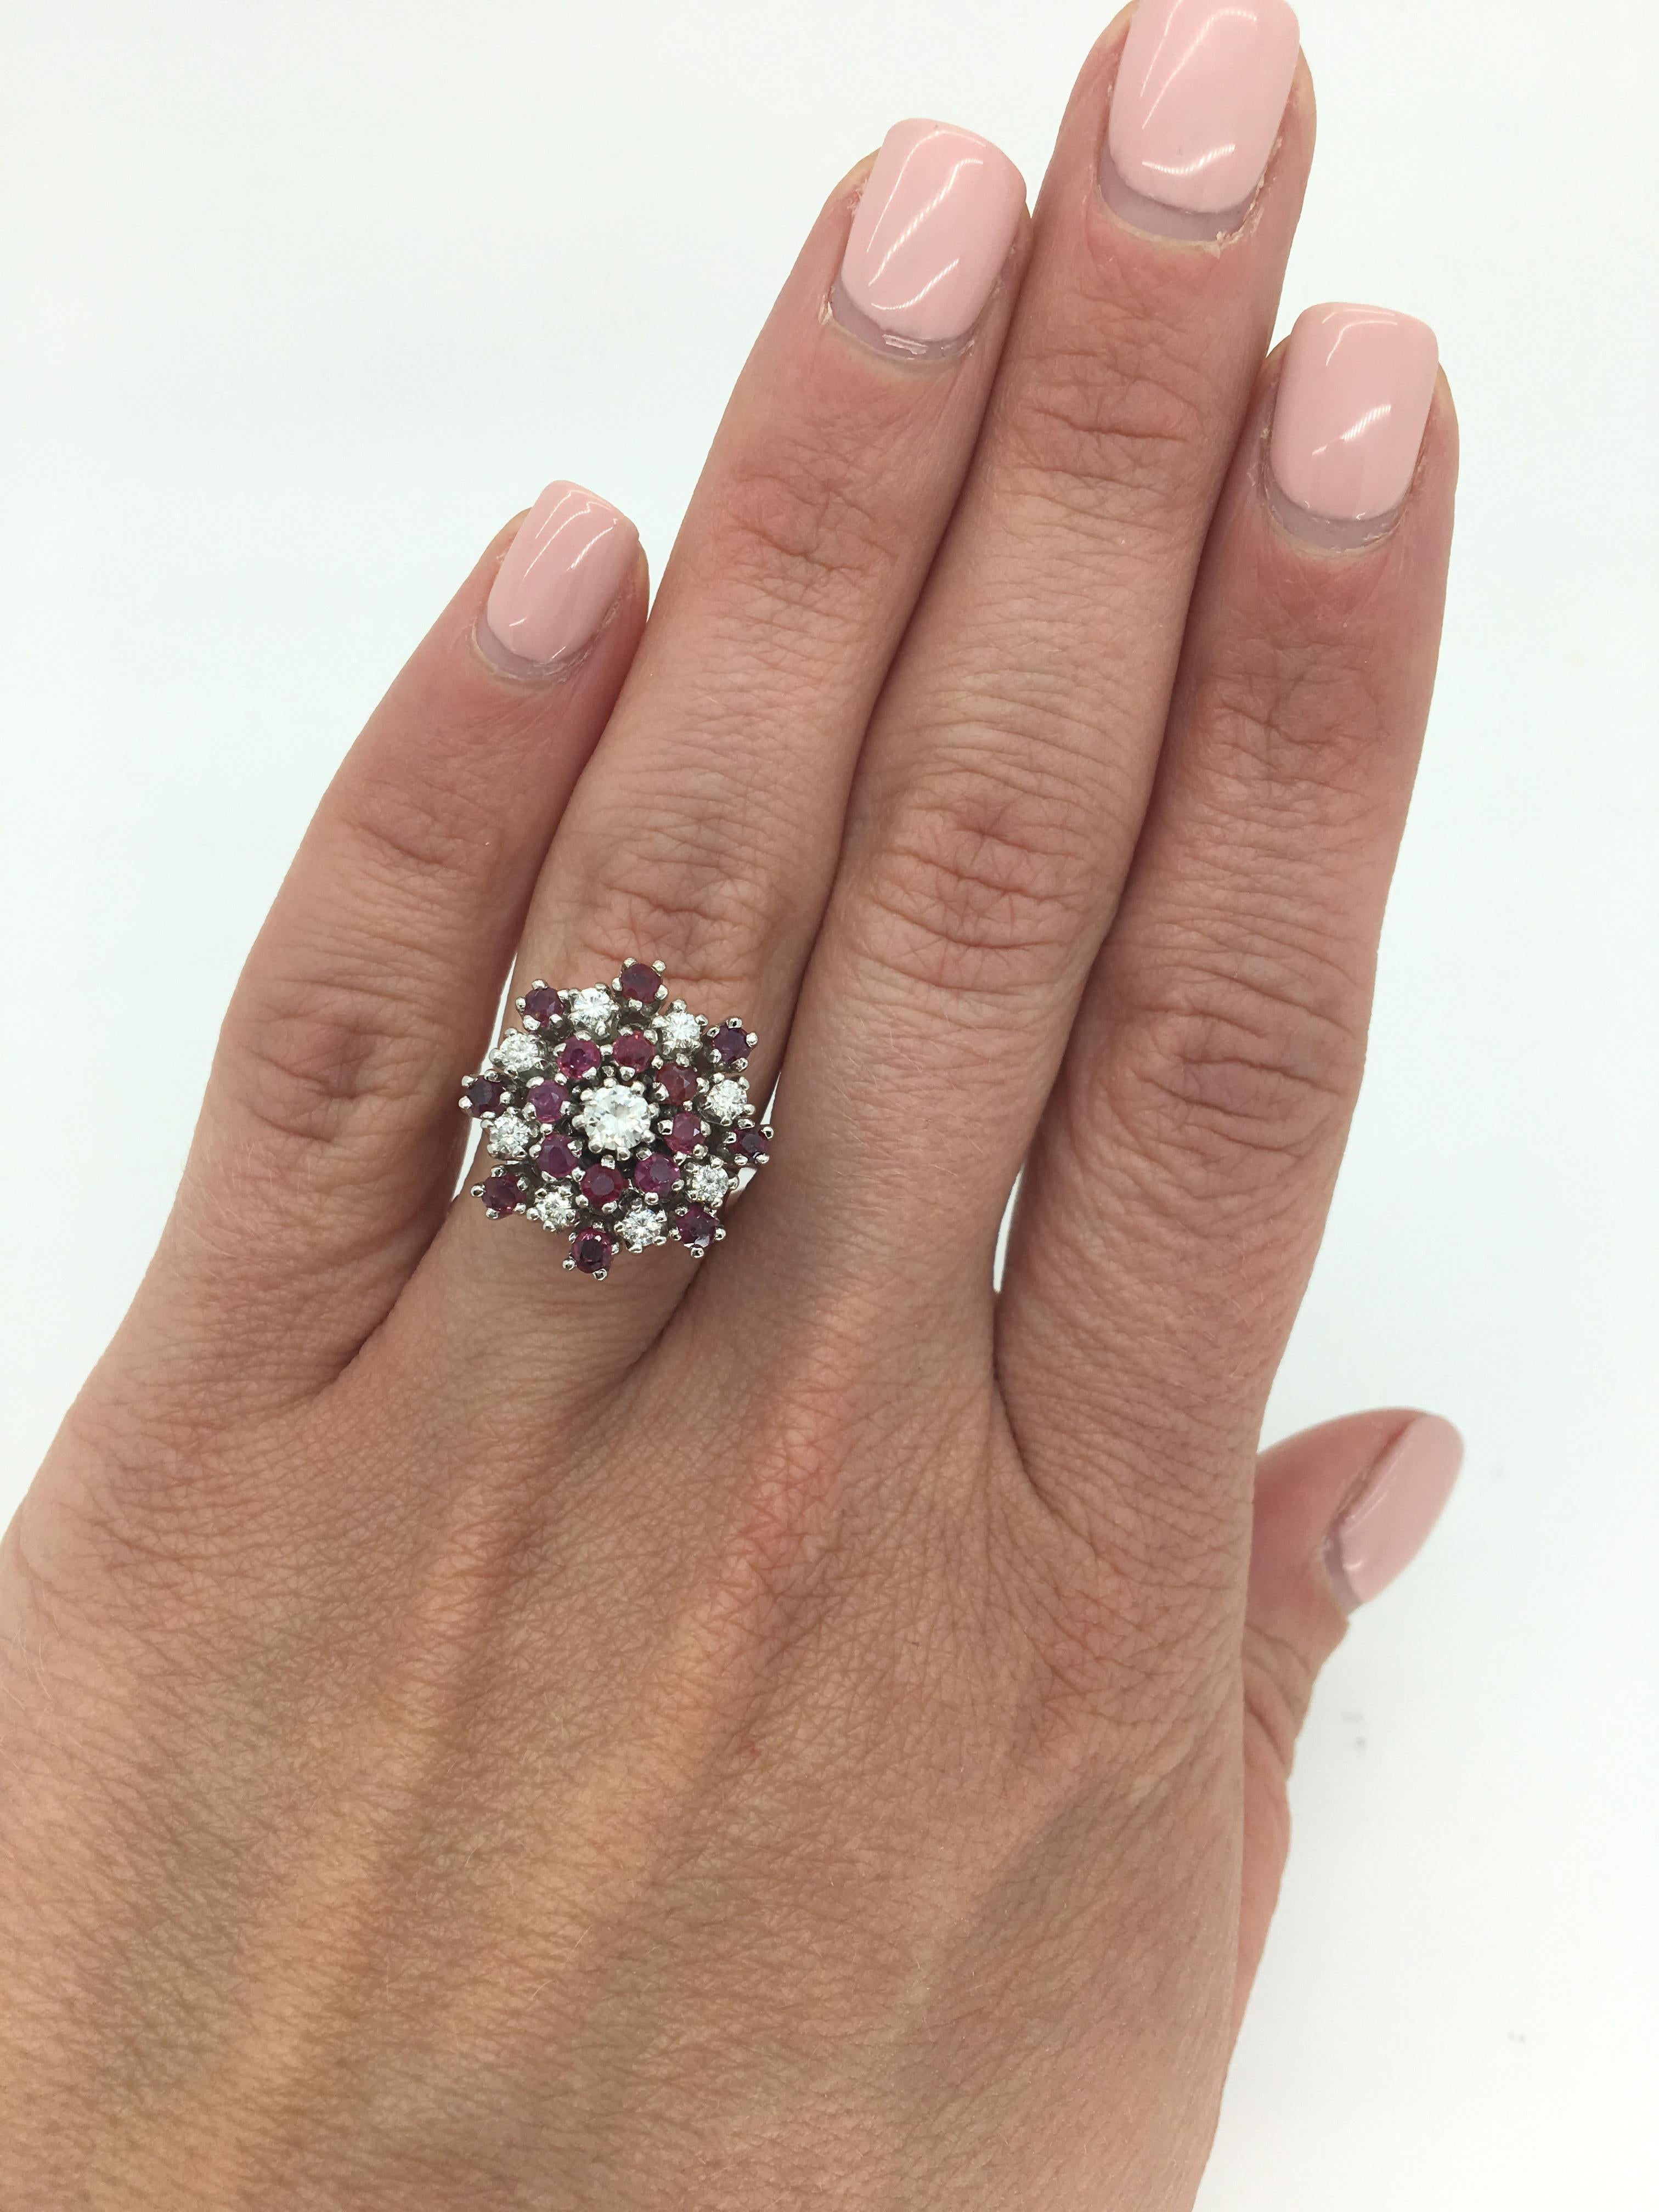 This vintage ring features approximately .50ctw of Round Brilliant cut diamonds and 16 beautiful Round Cut Rubies set in 14K white gold.

Gemstone: Ruby & Diamond
Diamond Carat Weight: Approximately .50CTW
Diamond Cut: 9 Round Brilliant Cut
Color: